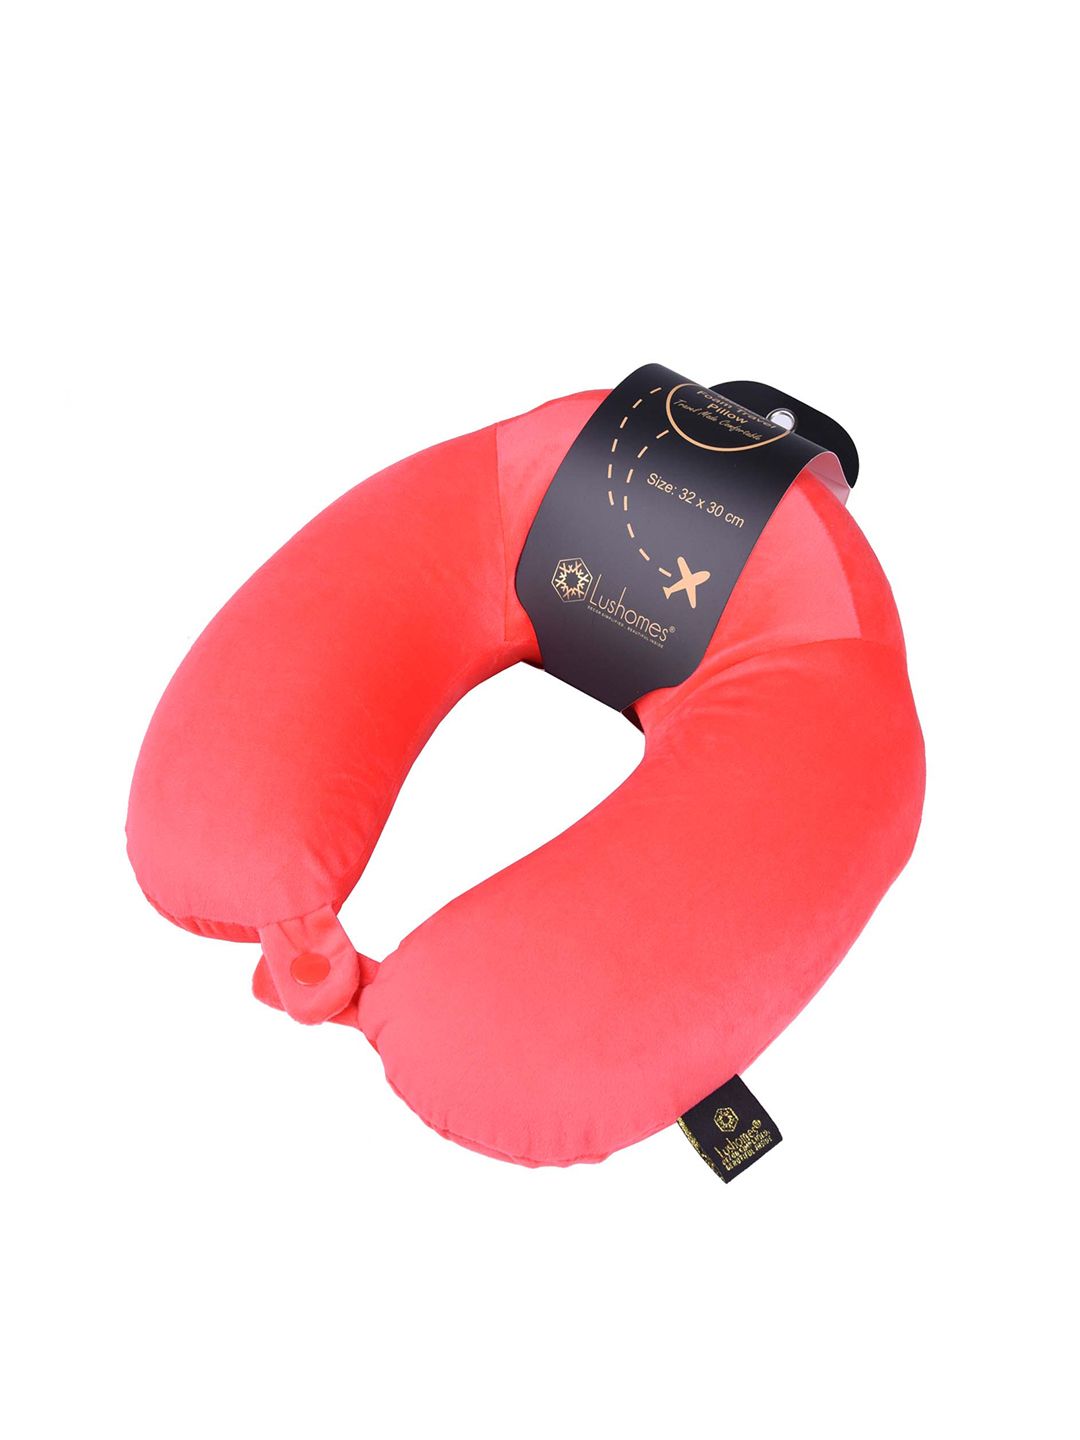 Lushomes Red Travel Neck Pillow Price in India